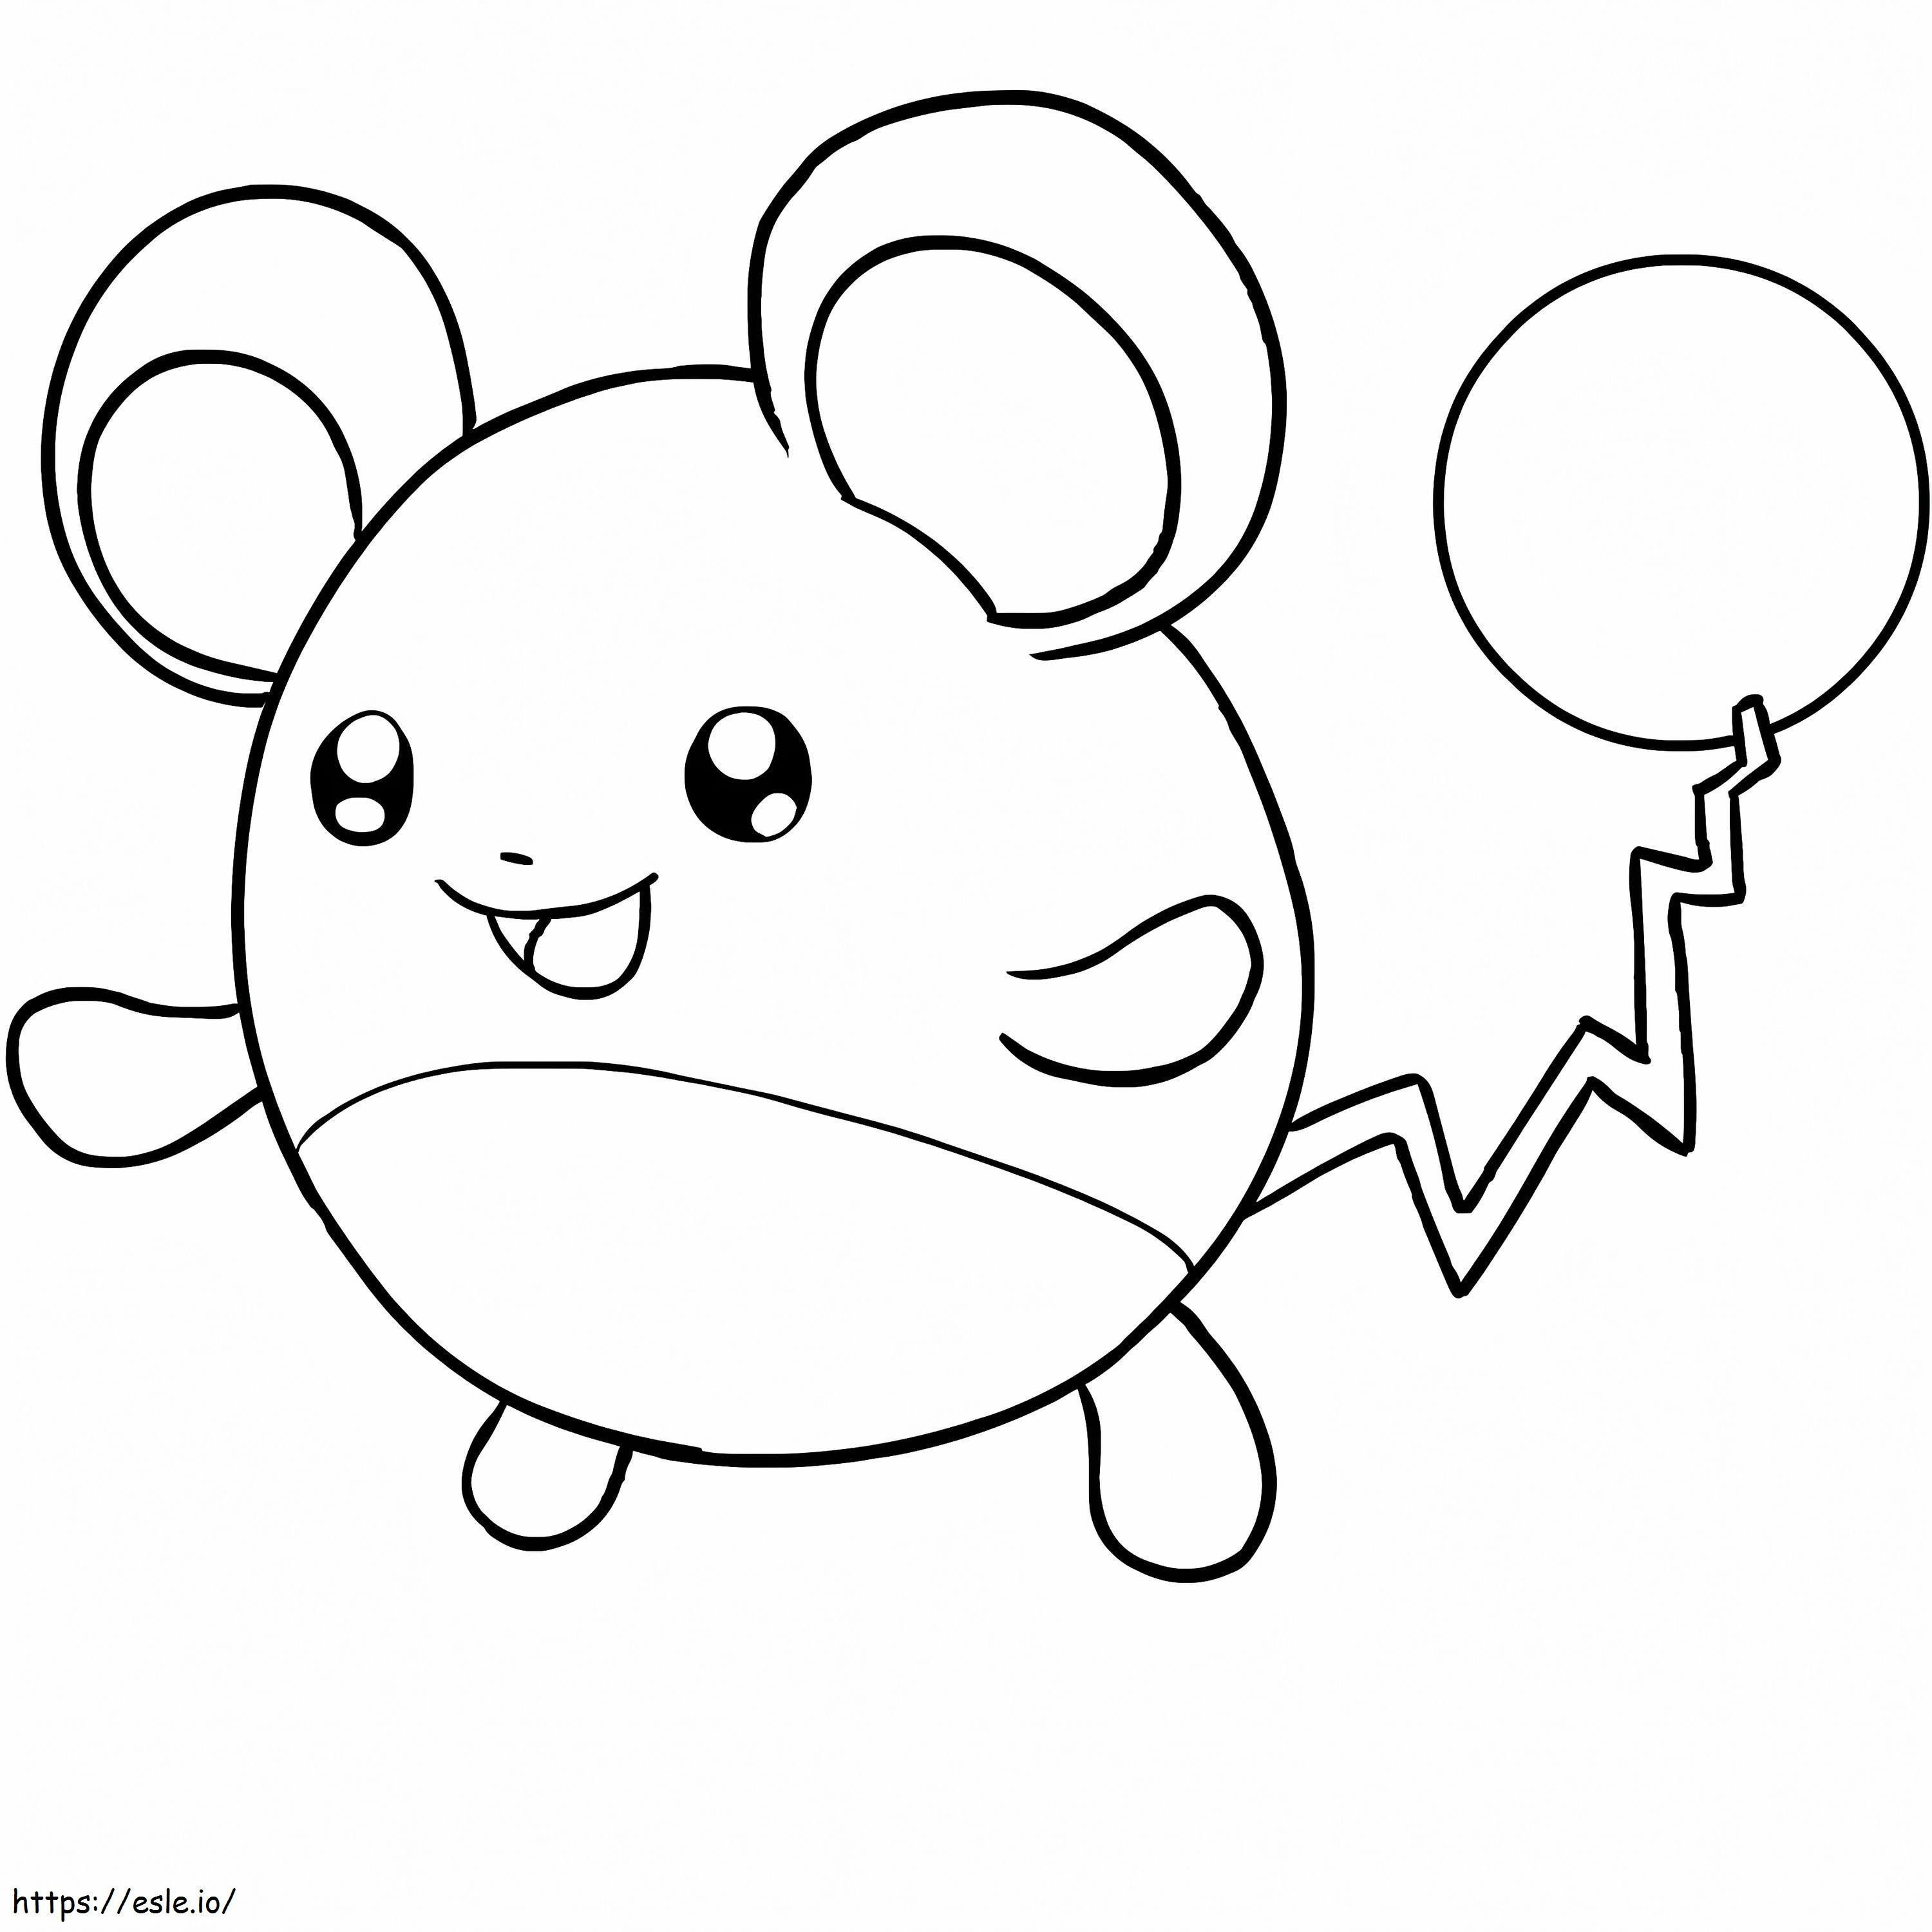 Marill 4 coloring page